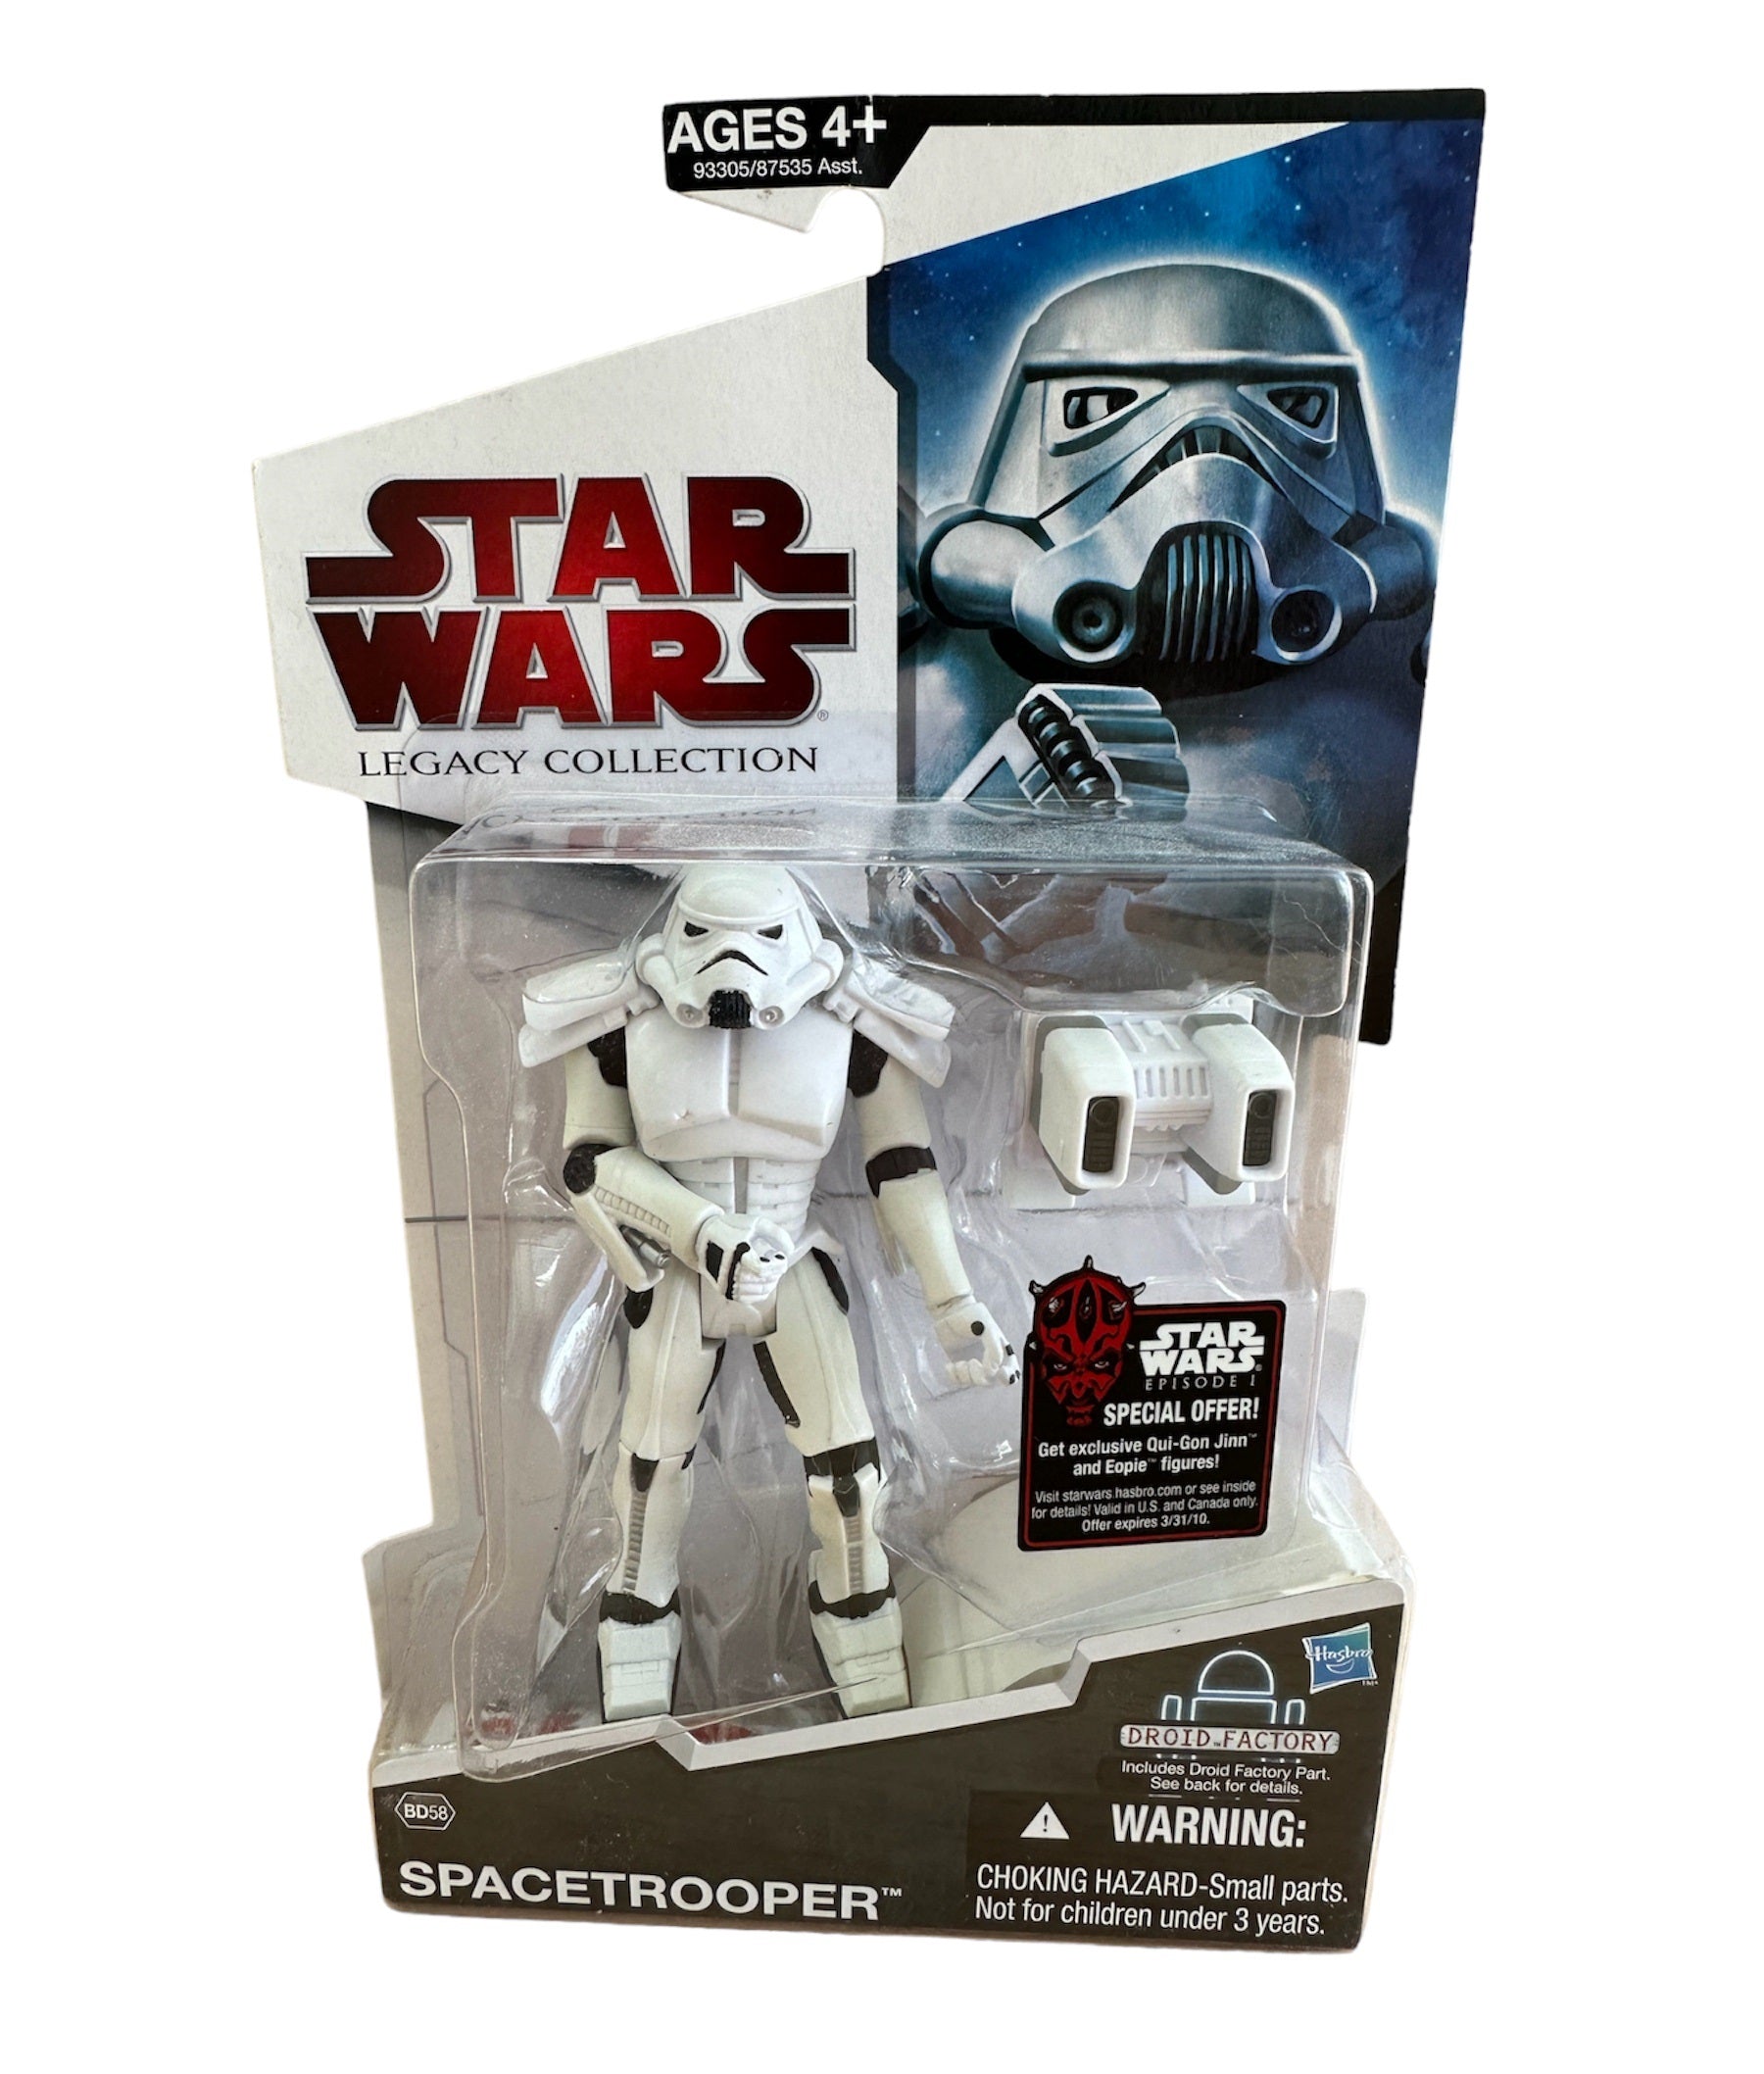 Vintage 2009 Star Wars Legacy Collection SpaceTrooper Action Figure With  Jet Pack BD58 - Includes Droid Factory Part - Brand New Factory Sealed Shop  